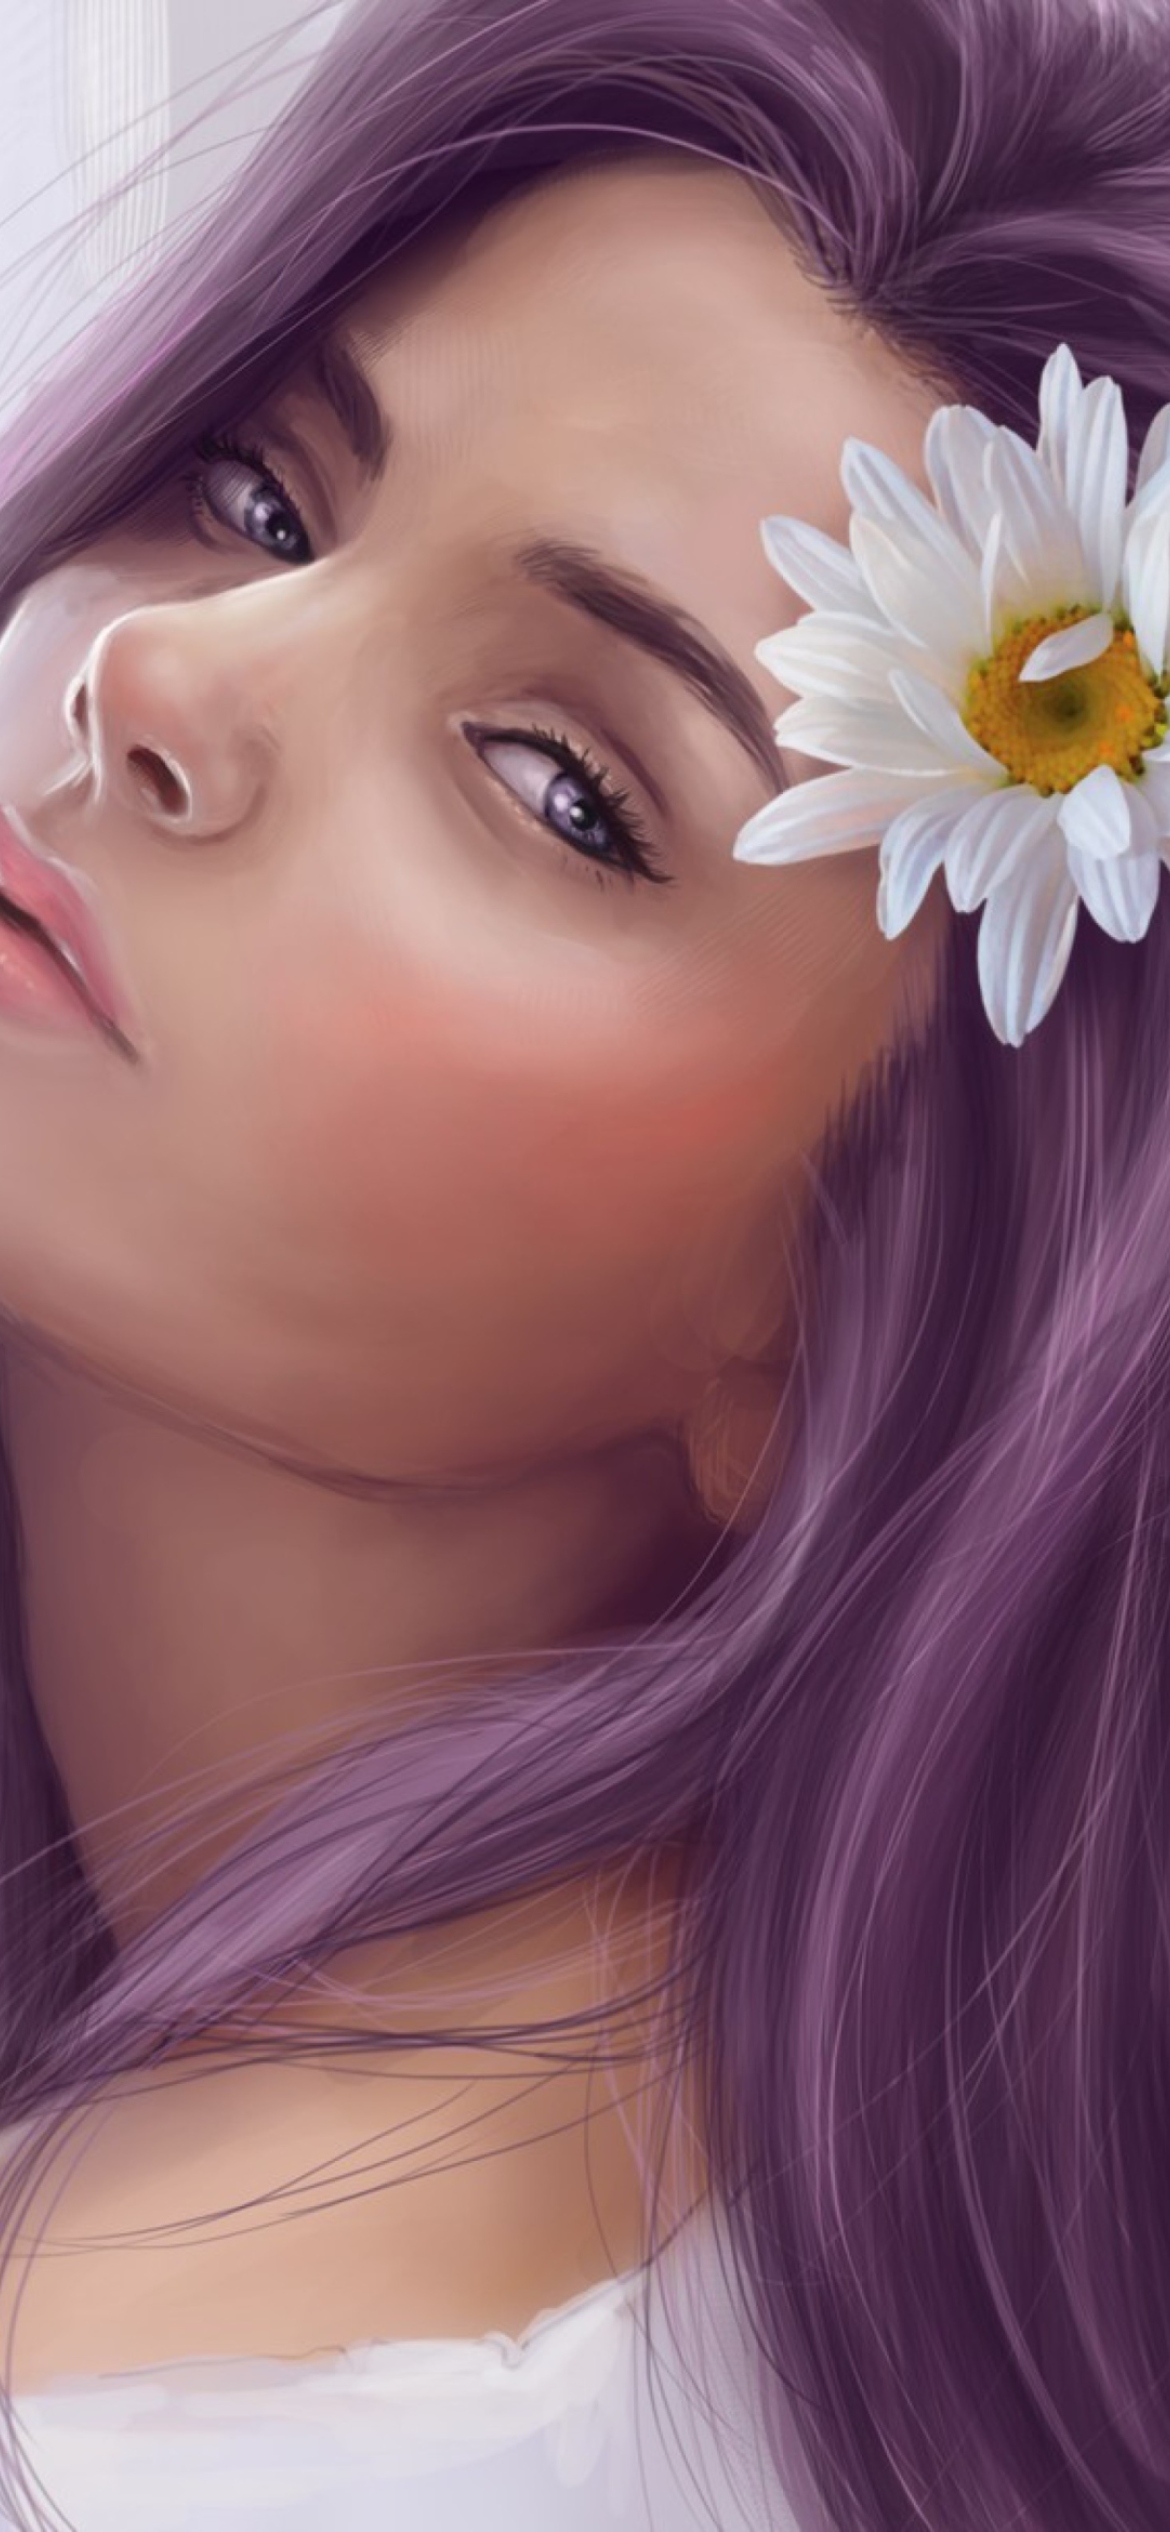 Das Girl With Purple Hair Painting Wallpaper 1170x2532